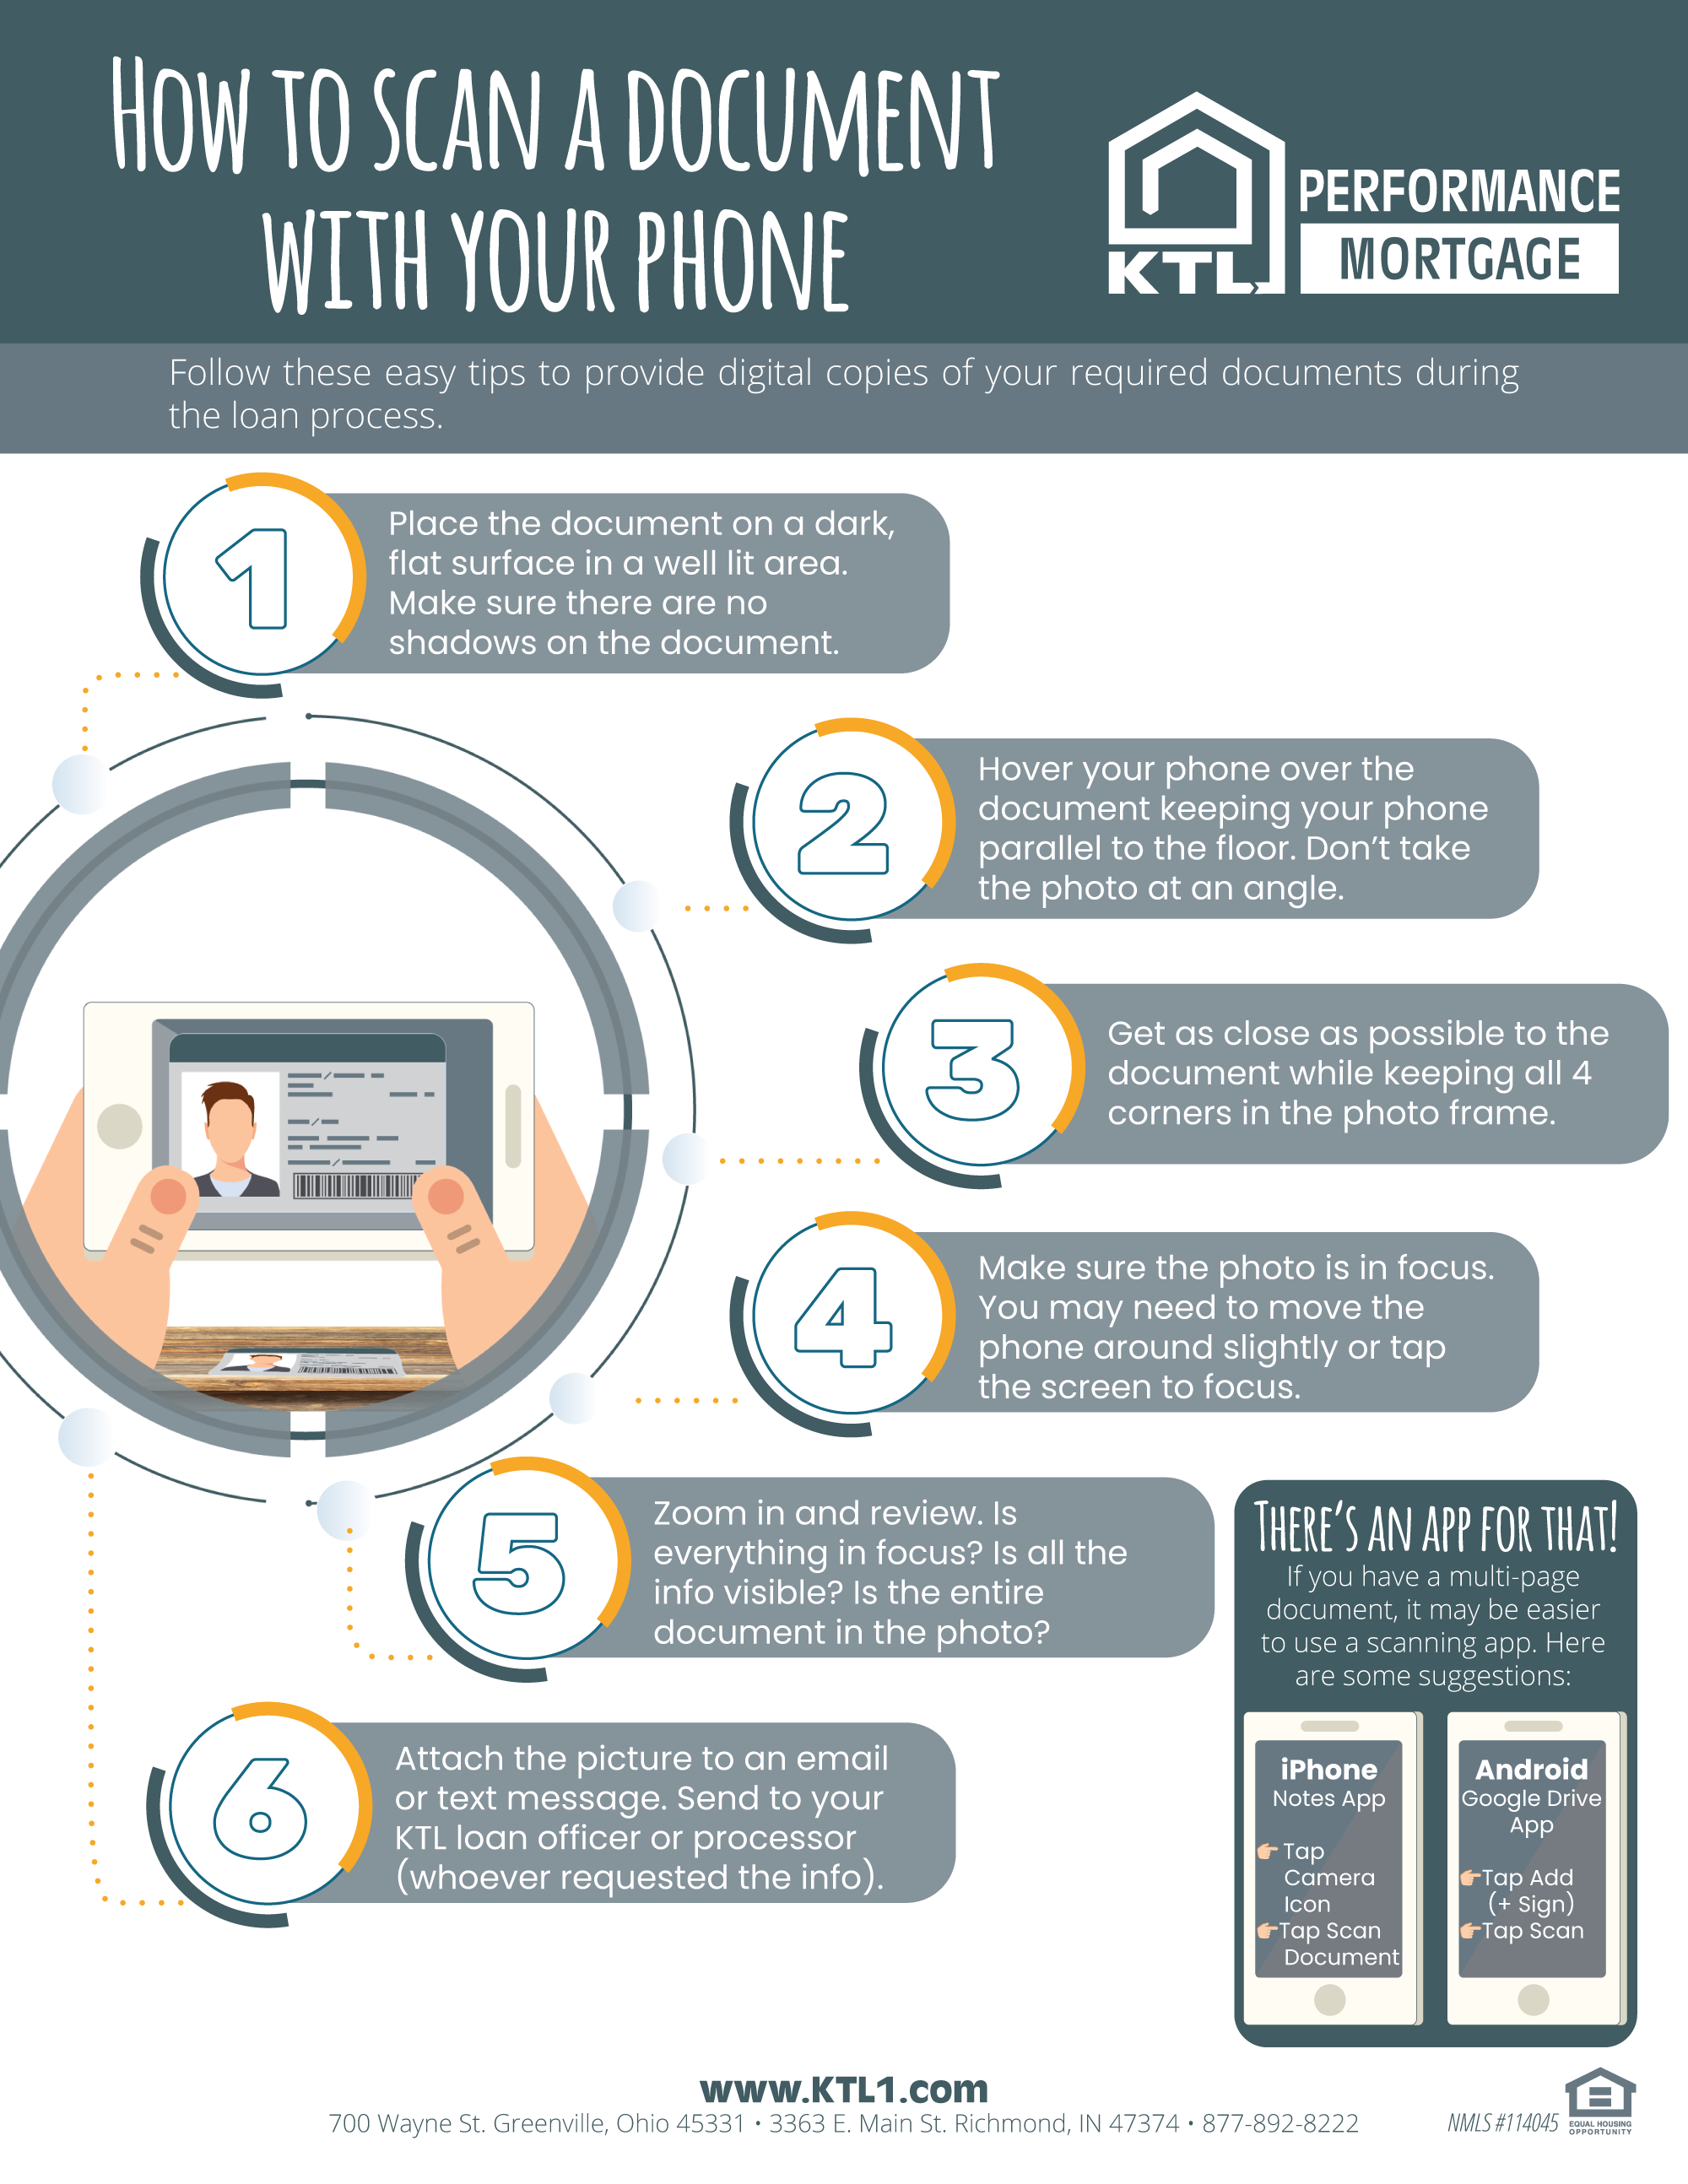 How-to-Scan-a-Document-with-your-Phone-Infographic